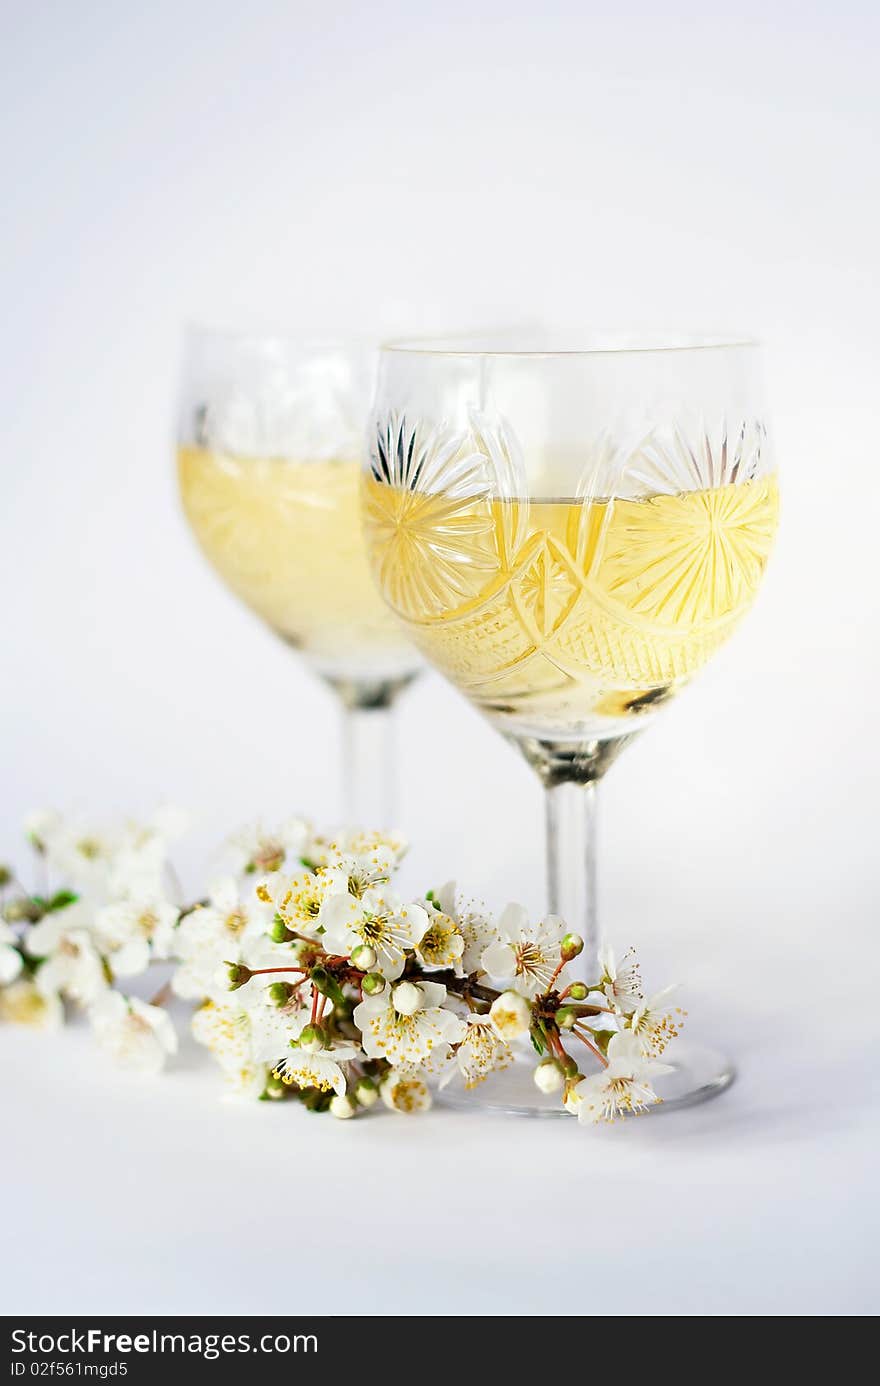 Romantic wine glasses with white wine and plums branch. Romantic wine glasses with white wine and plums branch